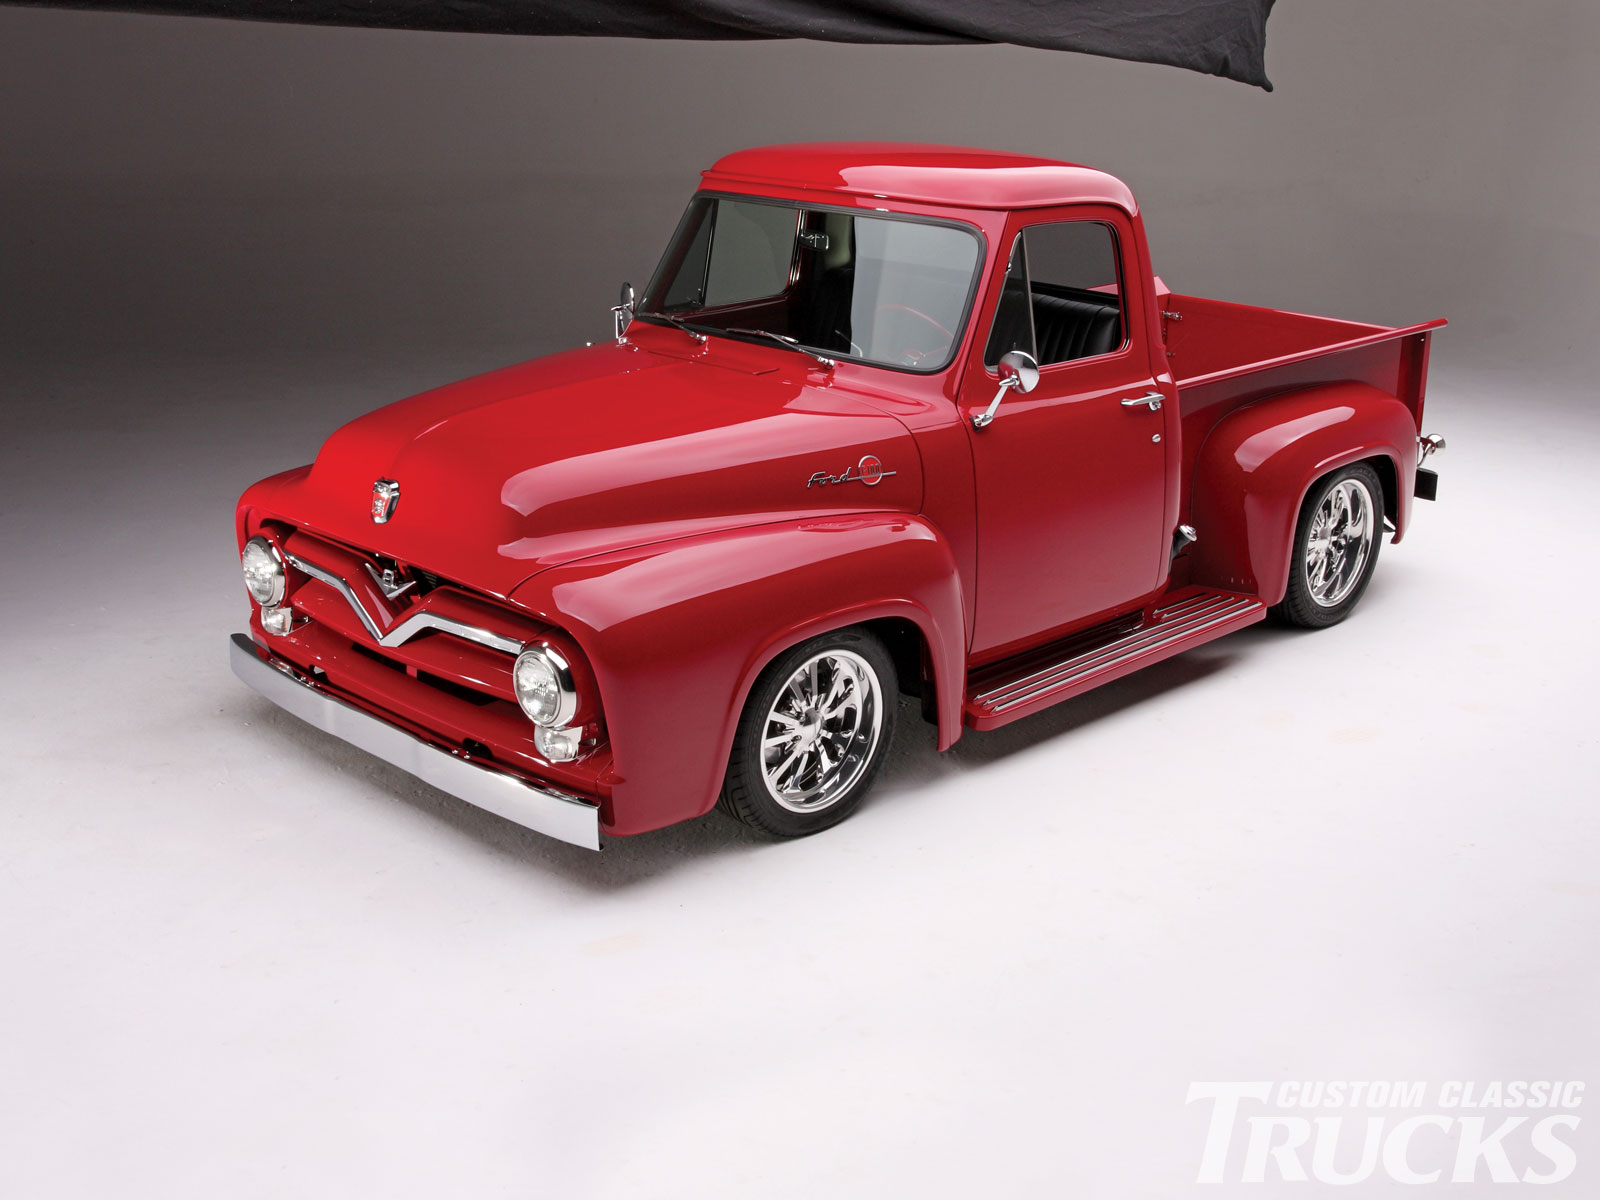 1955 Ford F 100 Pickup Truck   Ed Millers 55 Ford